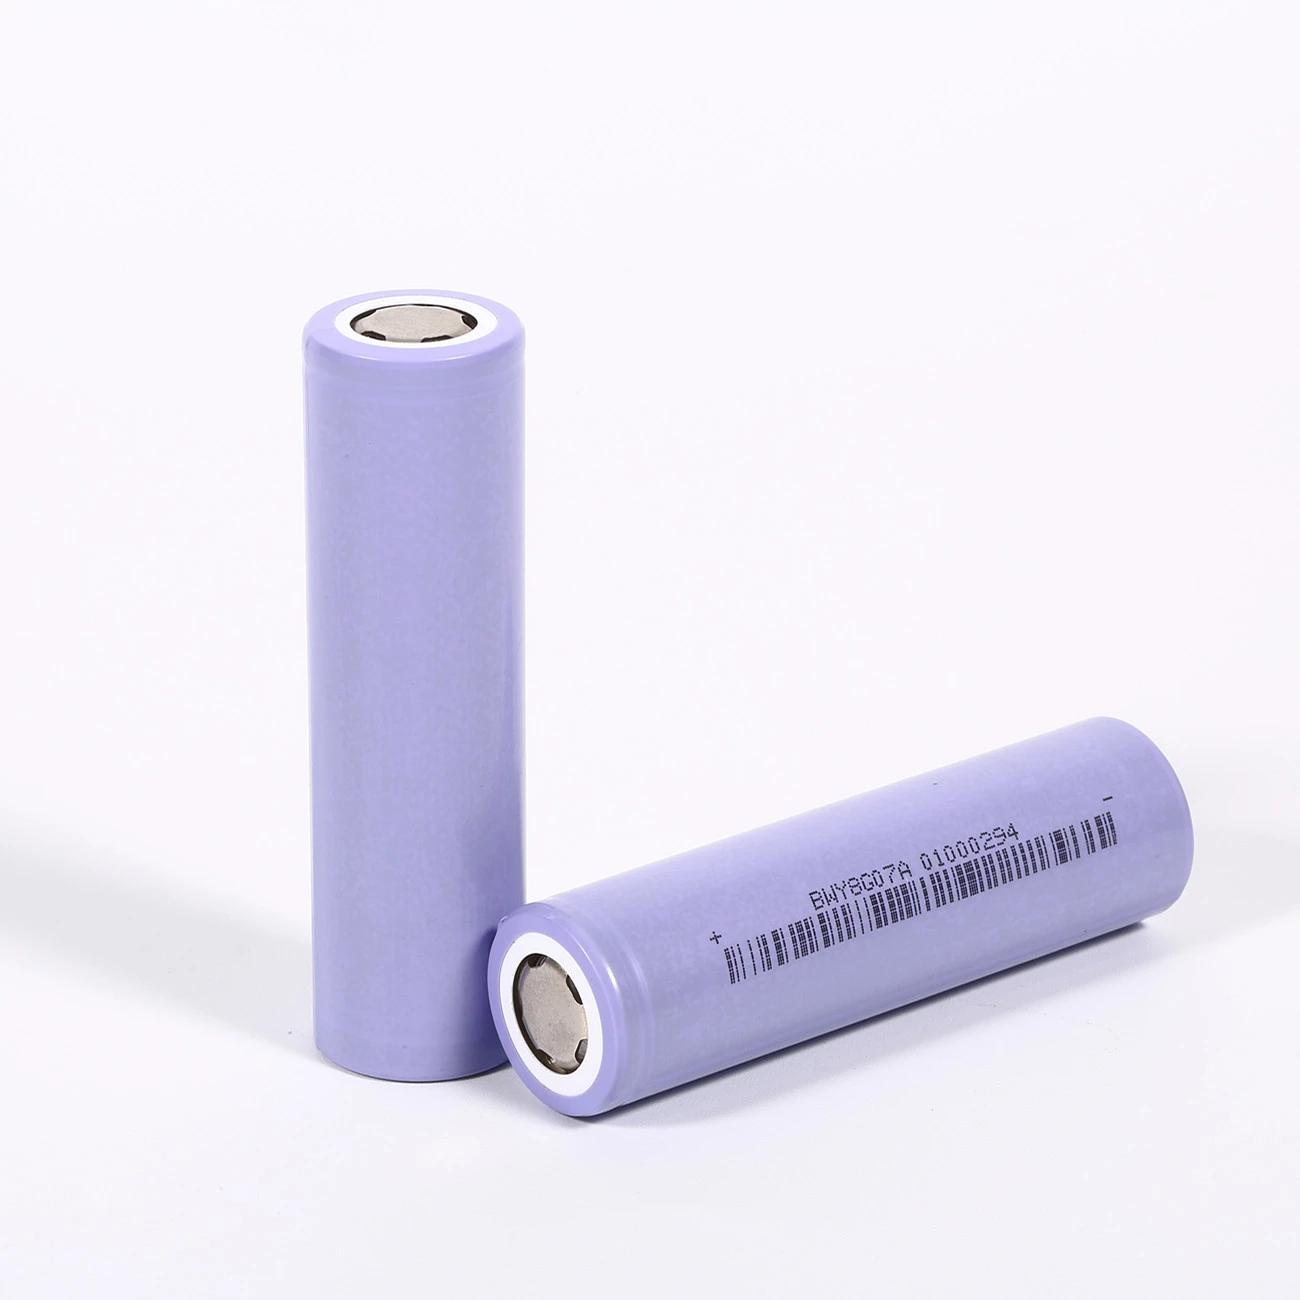 ​The benefits of Lithium-ion batteries